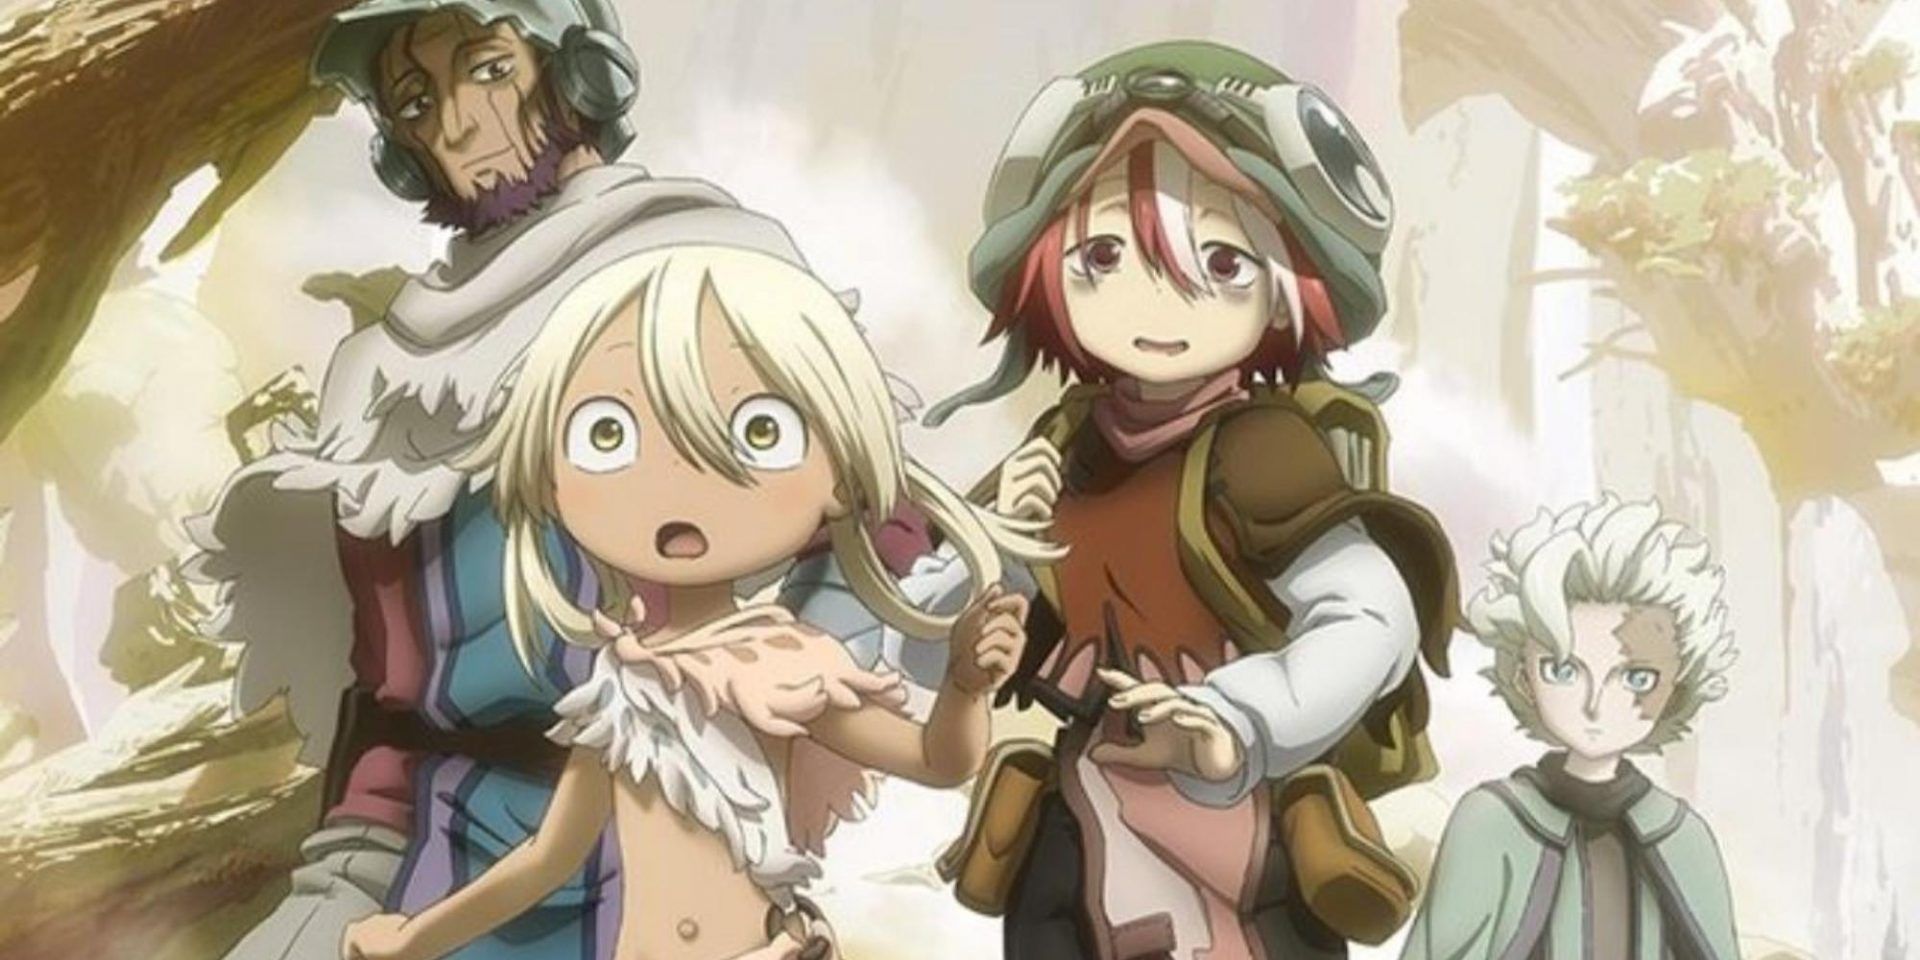 Homesickness Made in Abyss Season 2 Episode 8 Reaction and Discussion 